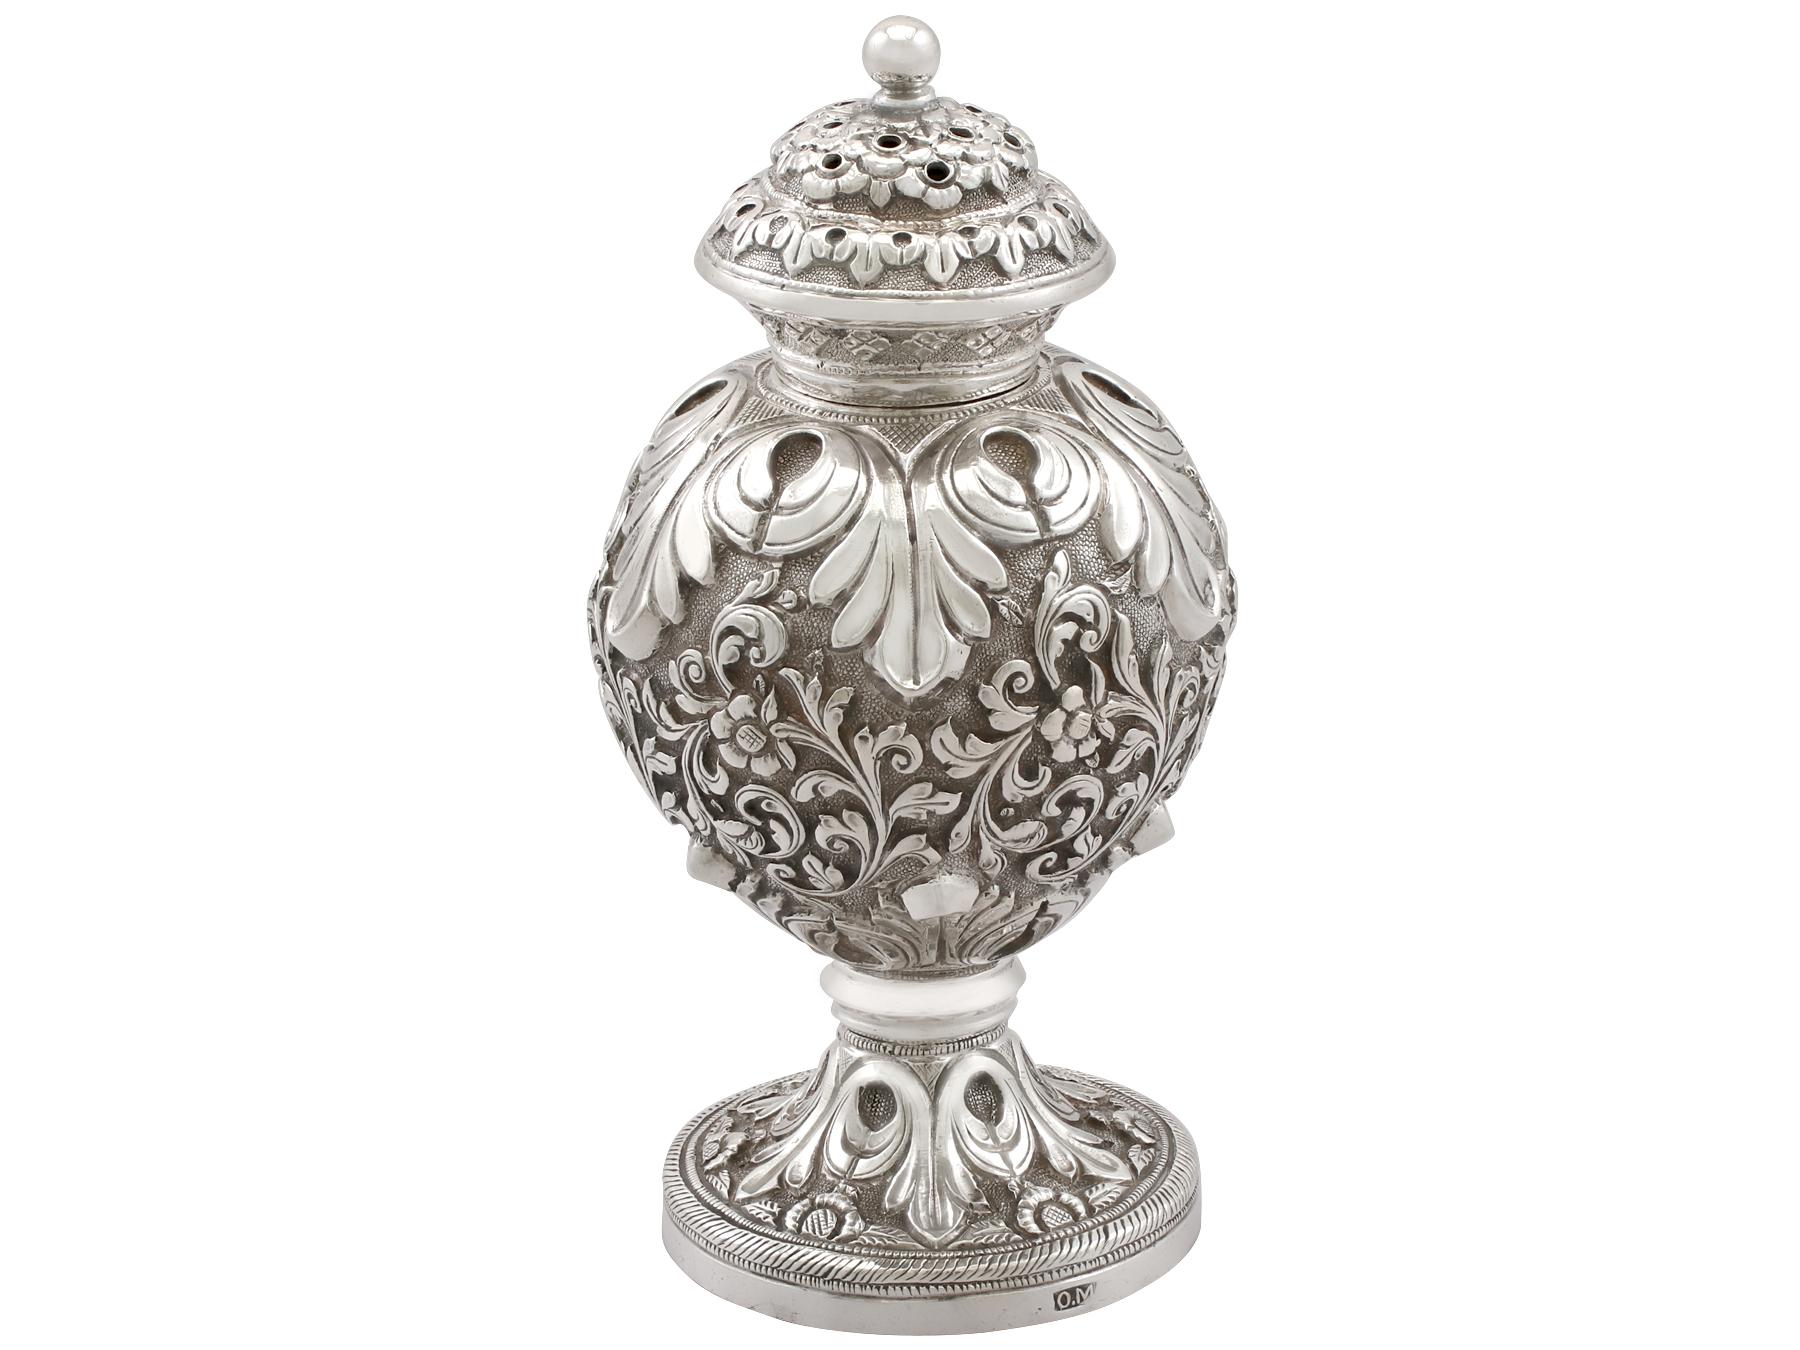 An exceptional, fine and impressive, pair of antique Indian silver peppers by Oomersee Mawjee & Sons, an addition to our silver cruets or condiments collection.

These exceptional antique silver peppers have a rounded ovoid form onto a pedestal